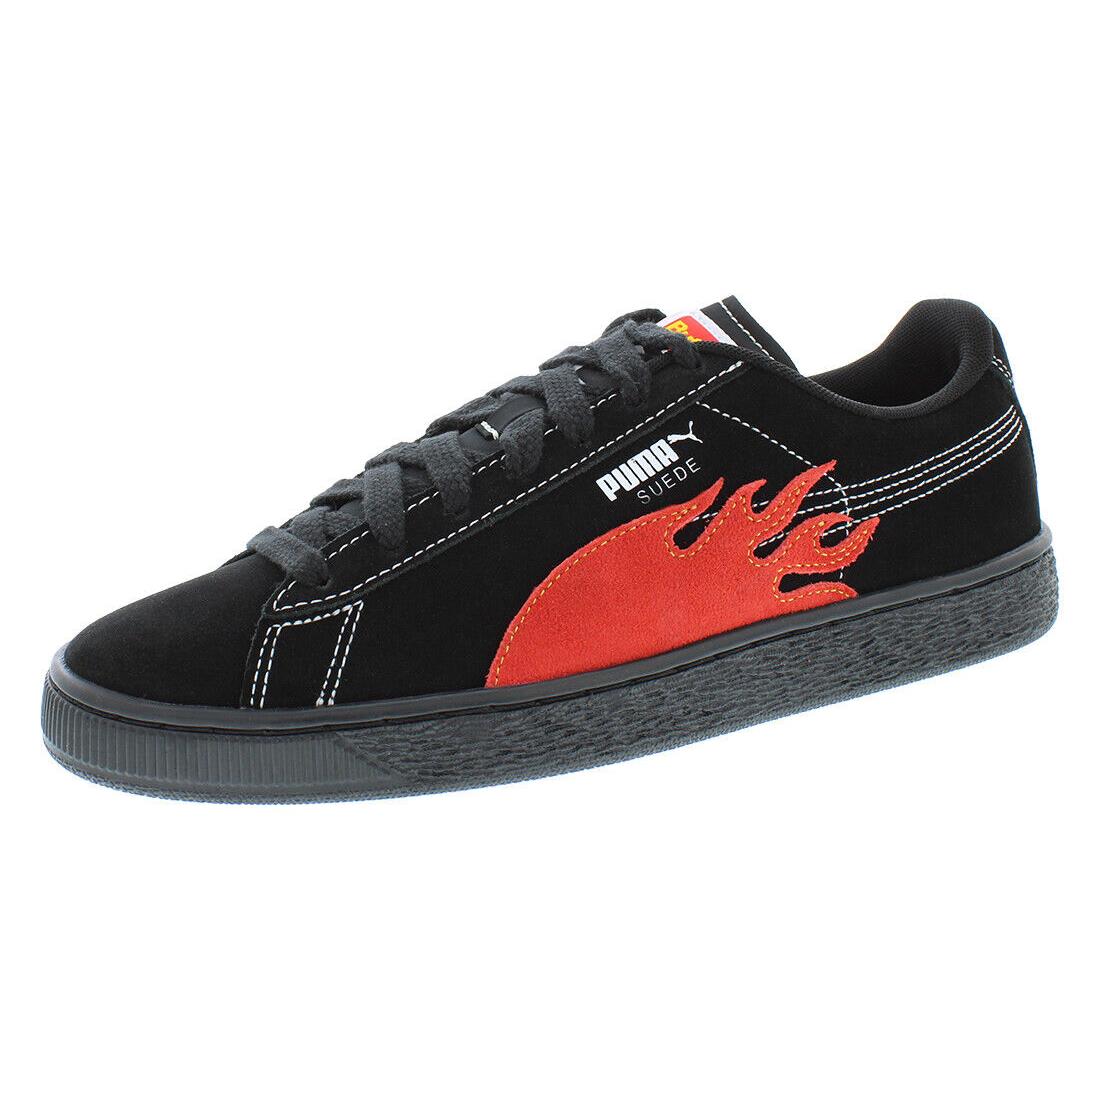 Puma Suede Classic Butter Goods Mens Shoes - Black/Red, Main: Black